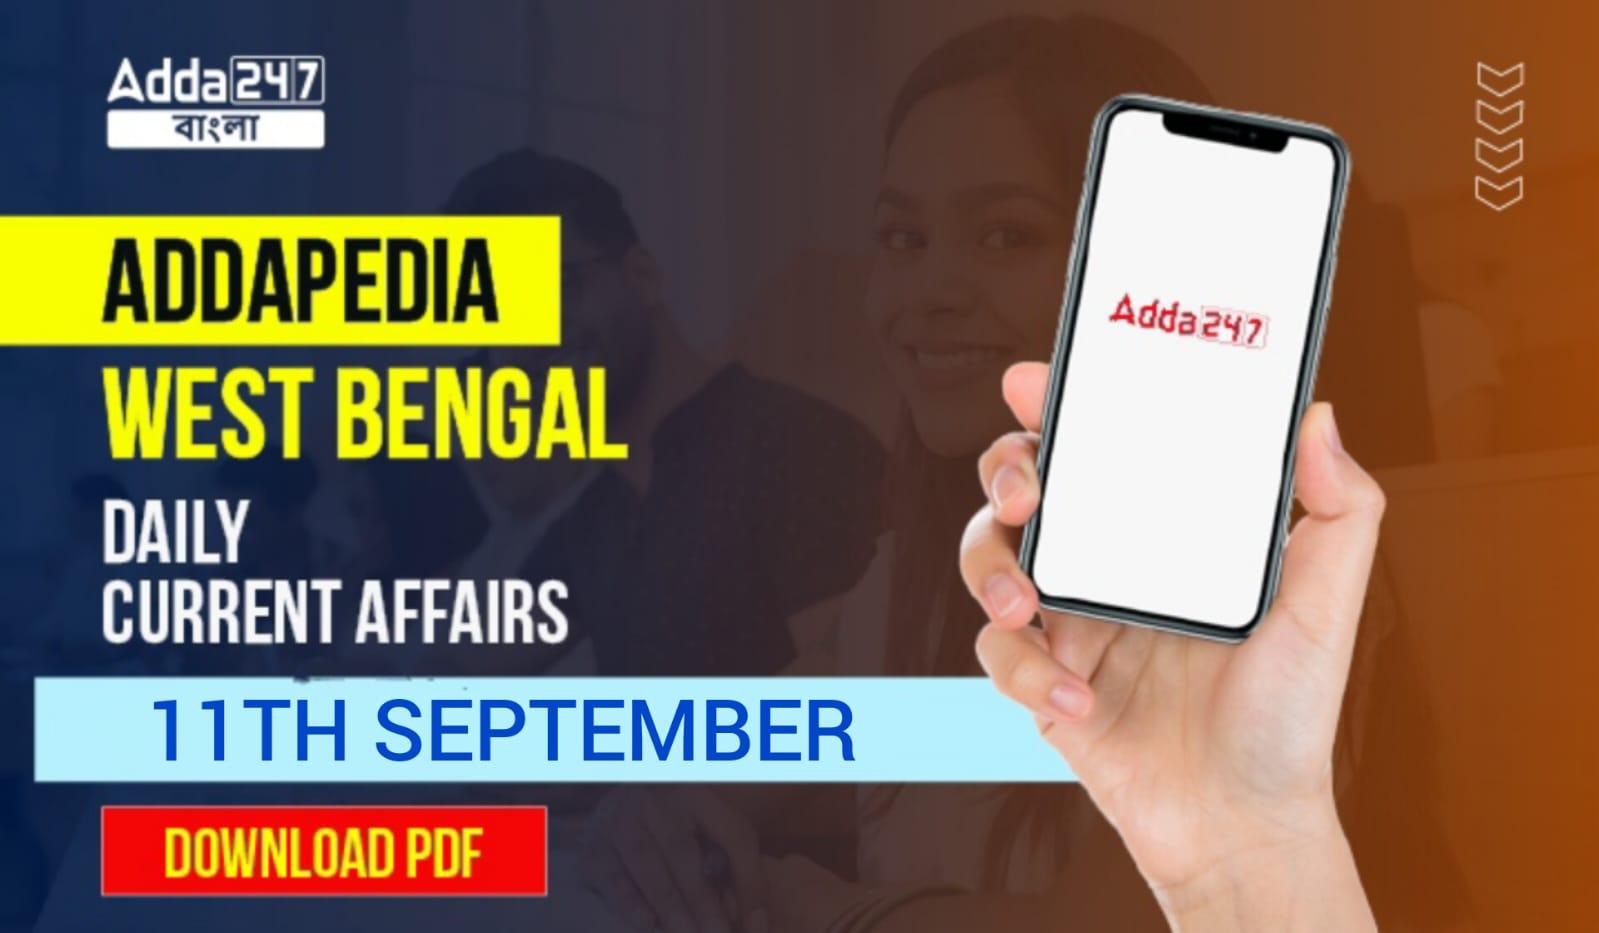 ADDAPEDIA West Bengal- Daily Current Affairs